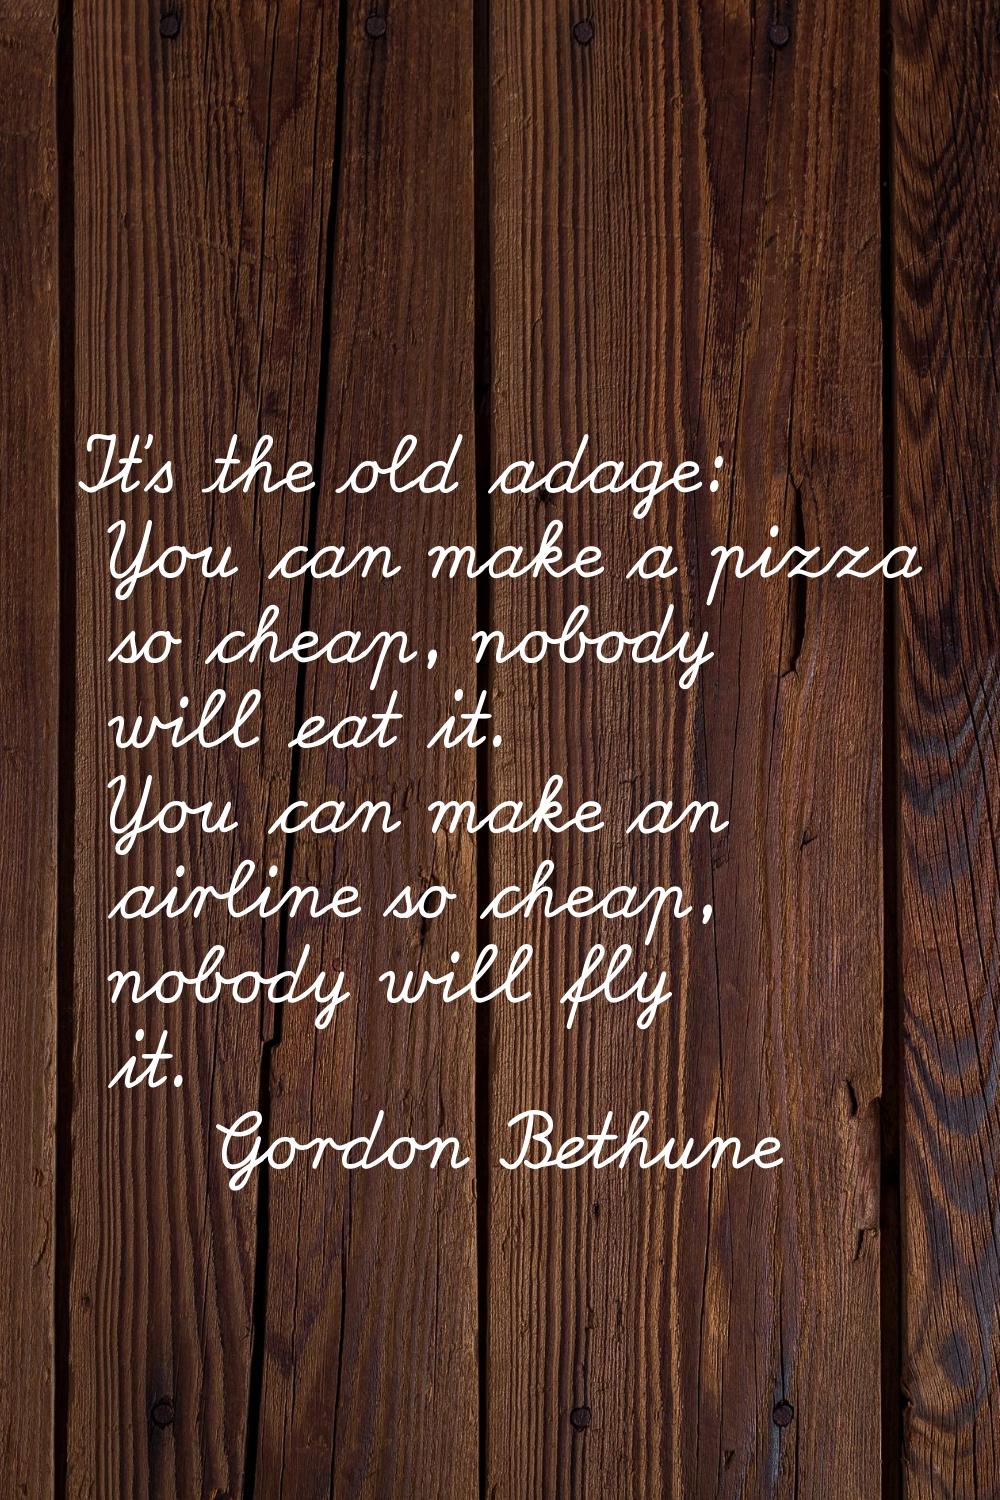 It's the old adage: You can make a pizza so cheap, nobody will eat it. You can make an airline so c